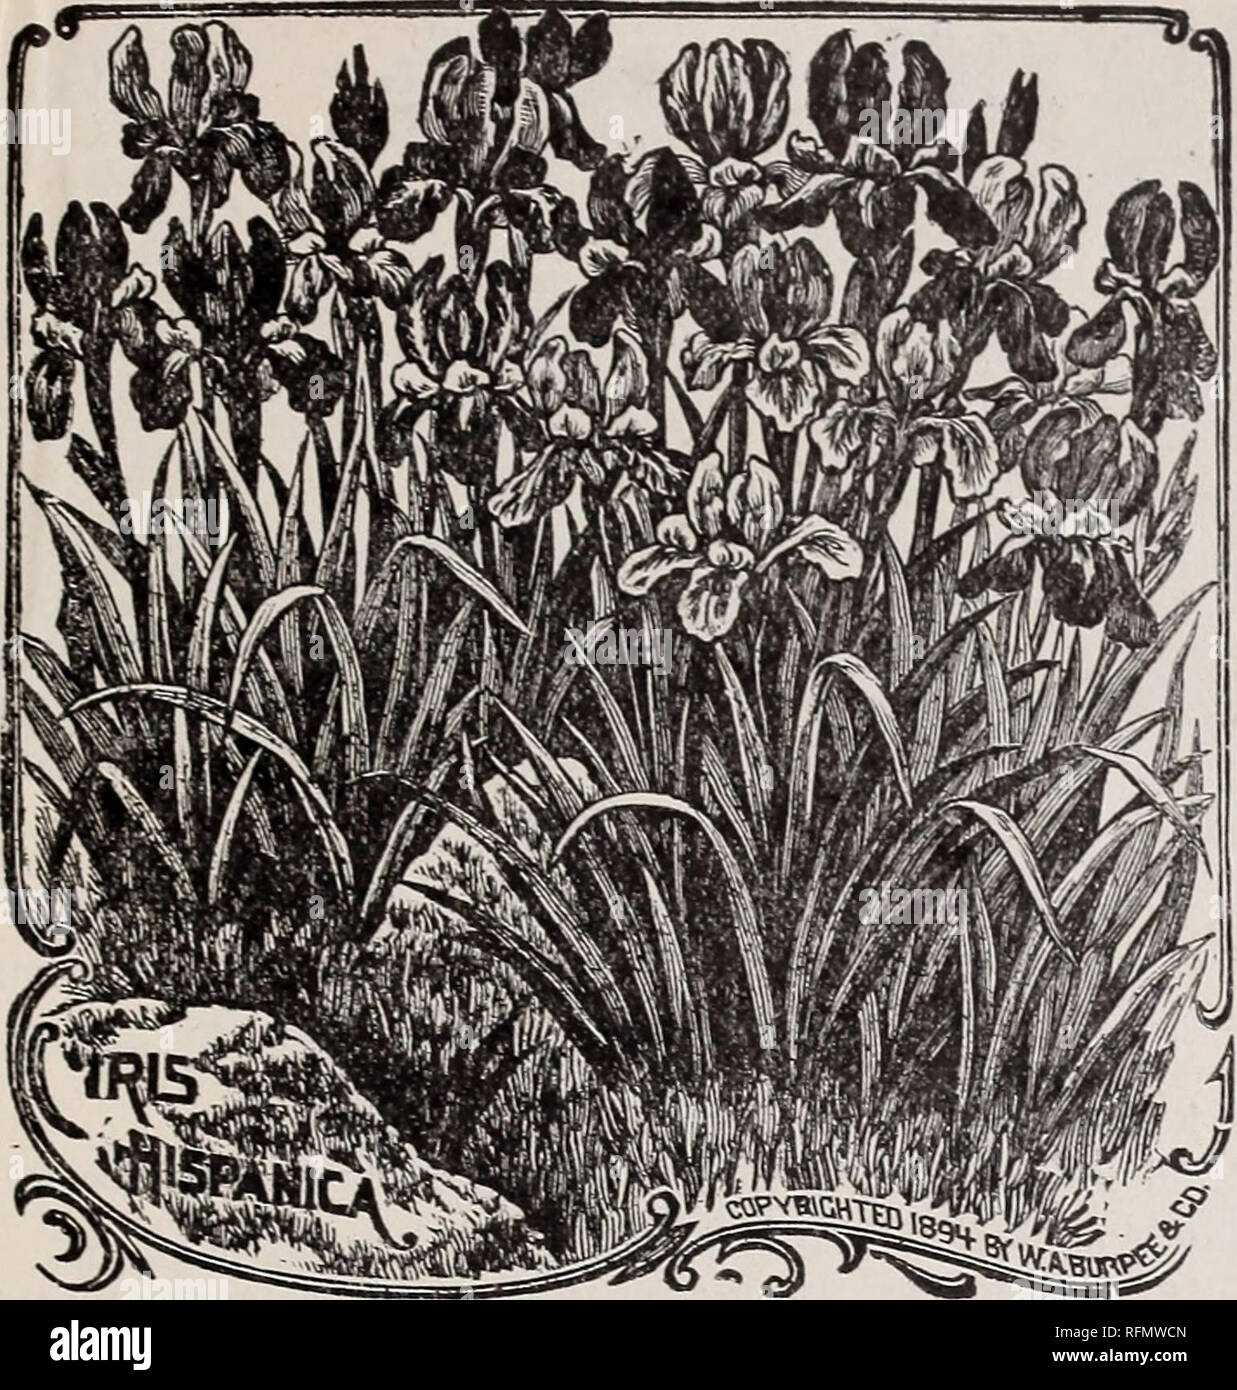 . Bulbs for fall, 1899. Nursery stock New York (State) Catalogs; Flowers Seeds Catalogs; Bulbs (Plants) Catalogs. PHEBE J. MARSHALL, HIBERNIA, DUTCHESS CO . N. Y.. Th. BEAUTIFUL SPANISH IRIS ia one of the easiest grown and most beautiful of hardy bulbs. For winter flowers, it blooms quick and easy inside, is absolutely sure to bloom, grows twelve to fifteen inches high, and bears lovely, large, orchid-like flowers of many brilliant and striking colors, including ele- gant combinations of fine porcelain blue, deep violet, royal purple, golden-yellow, rich orange, pearly- white and coal-black—be Stock Photo